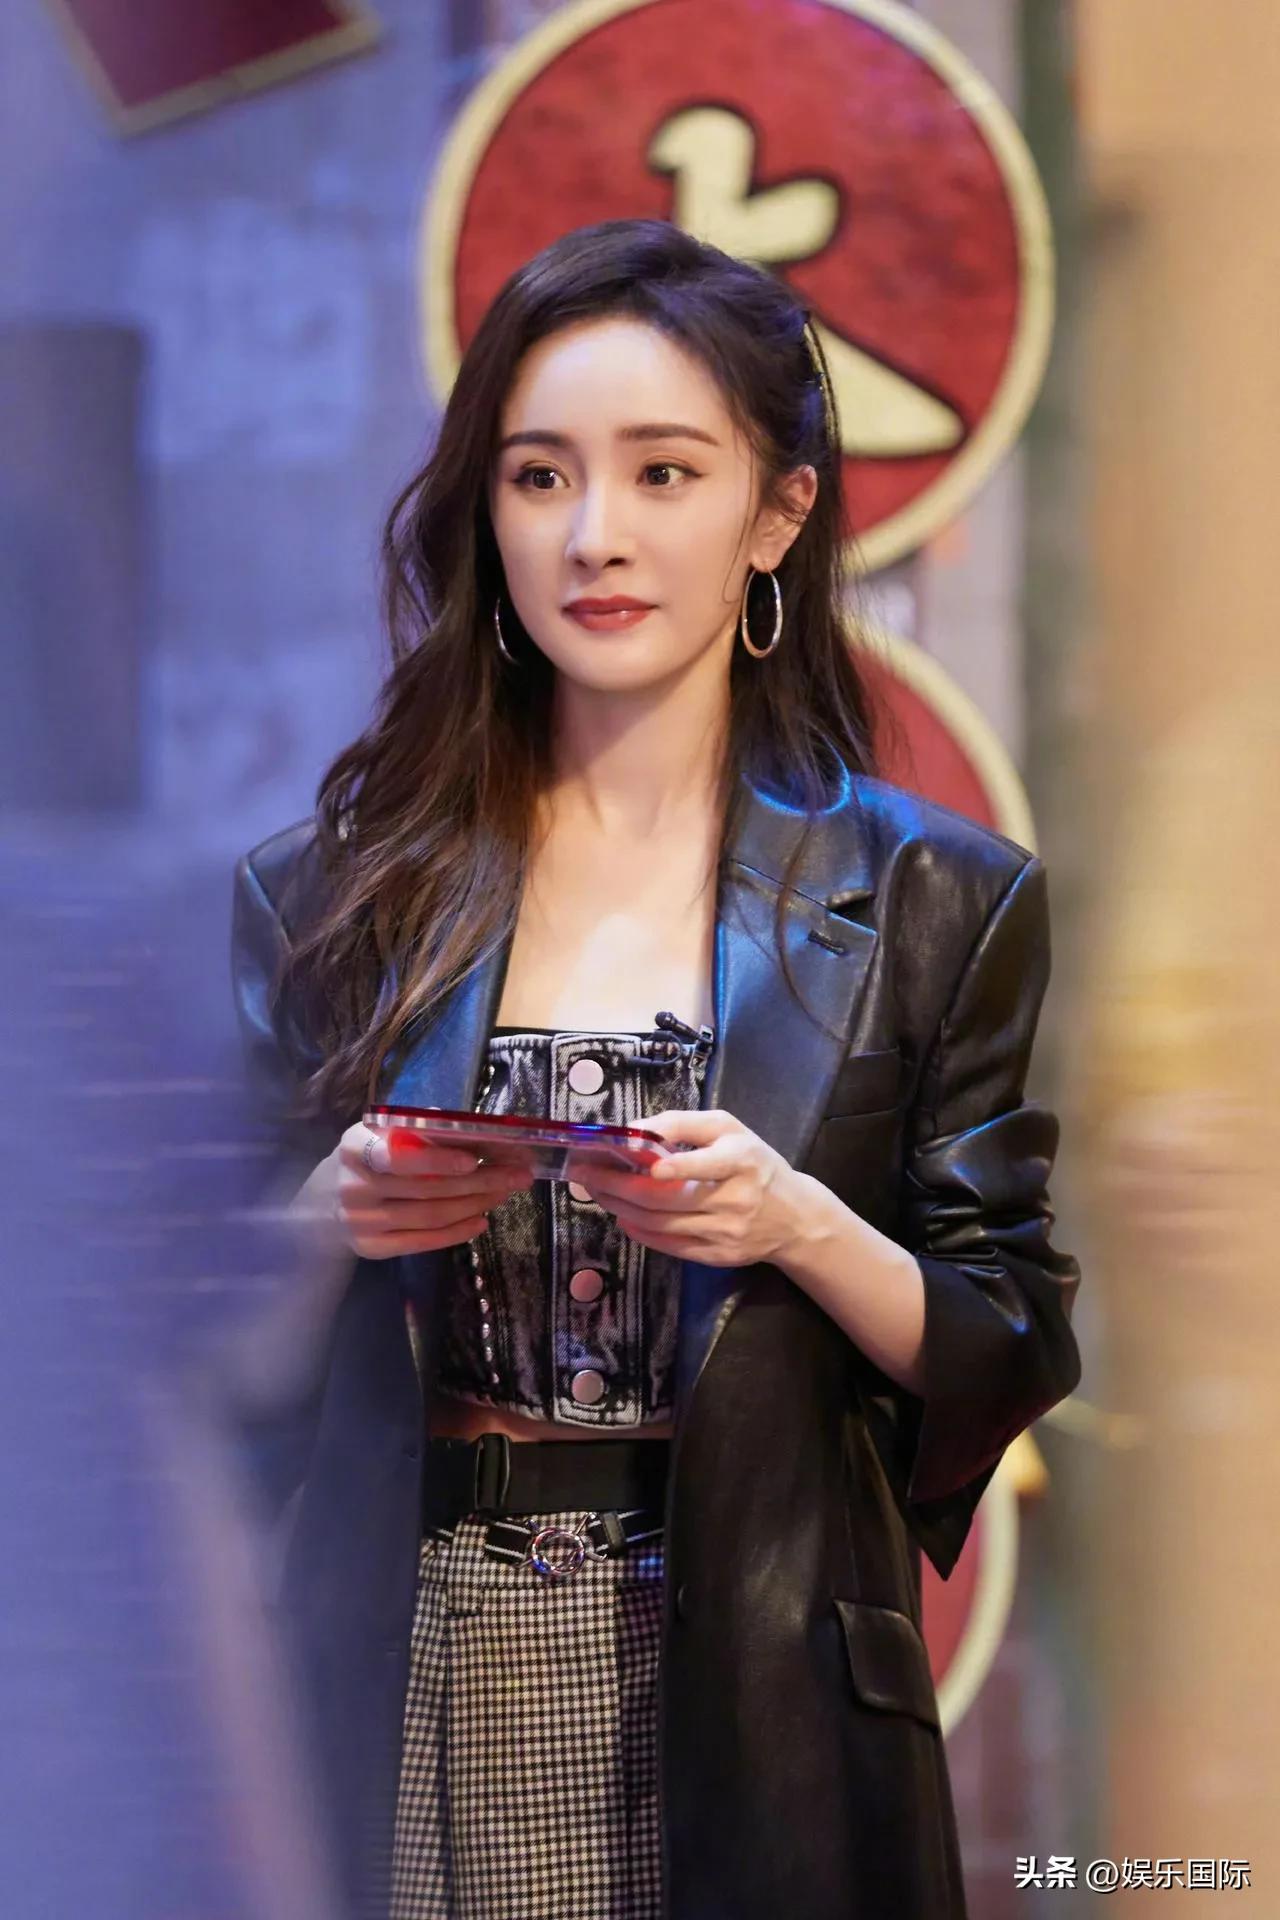 Yang Mi's new look shows off slender legs in short skirts and leather ...